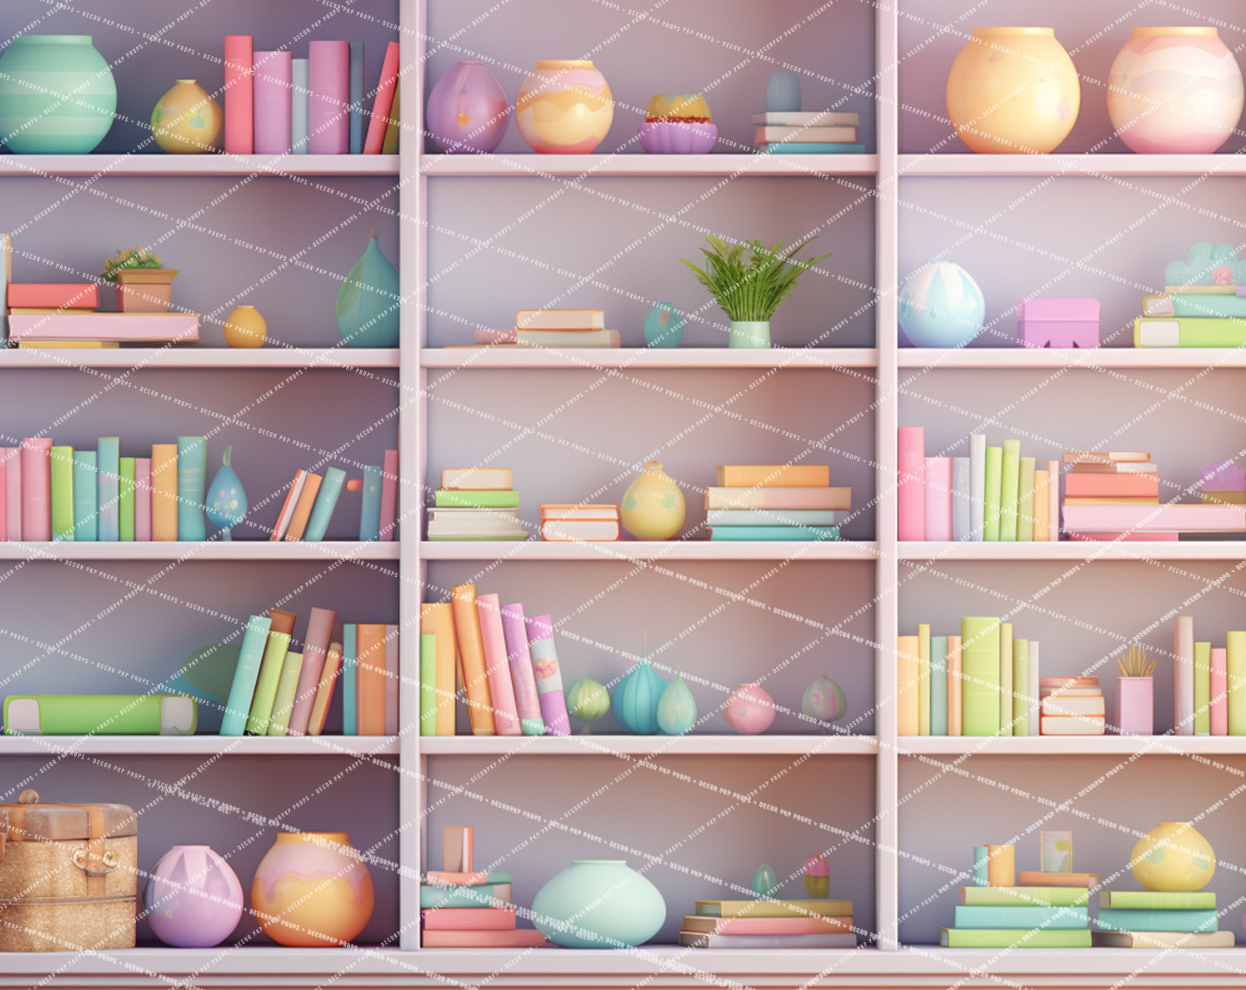 PASTEL LIBRARY - AS